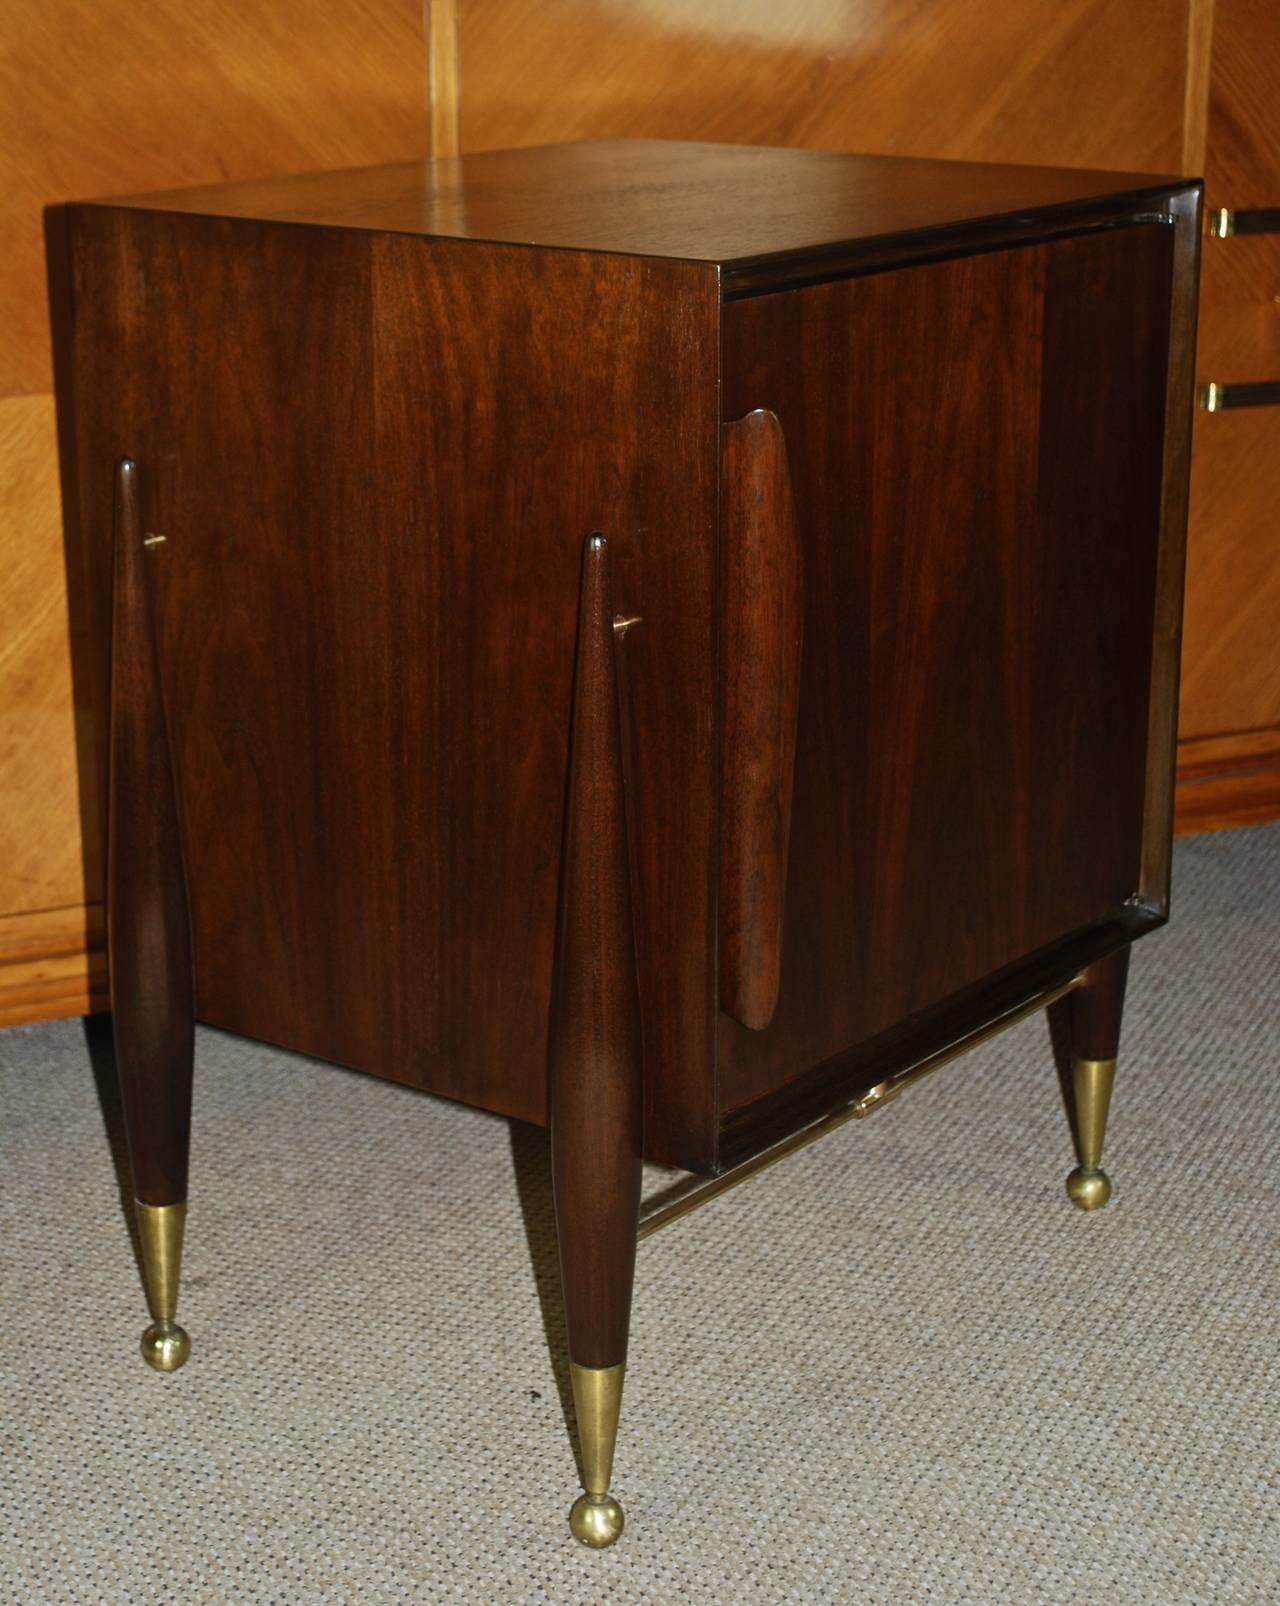 Newly refinished walnut nightstands with beautifully sculpted handle and legs.
Whimsical brass balls and casters on feet. Walnut grain nicely showcased.
Ample storage inside.

Please contact me to make sure items are available to view in gallery.